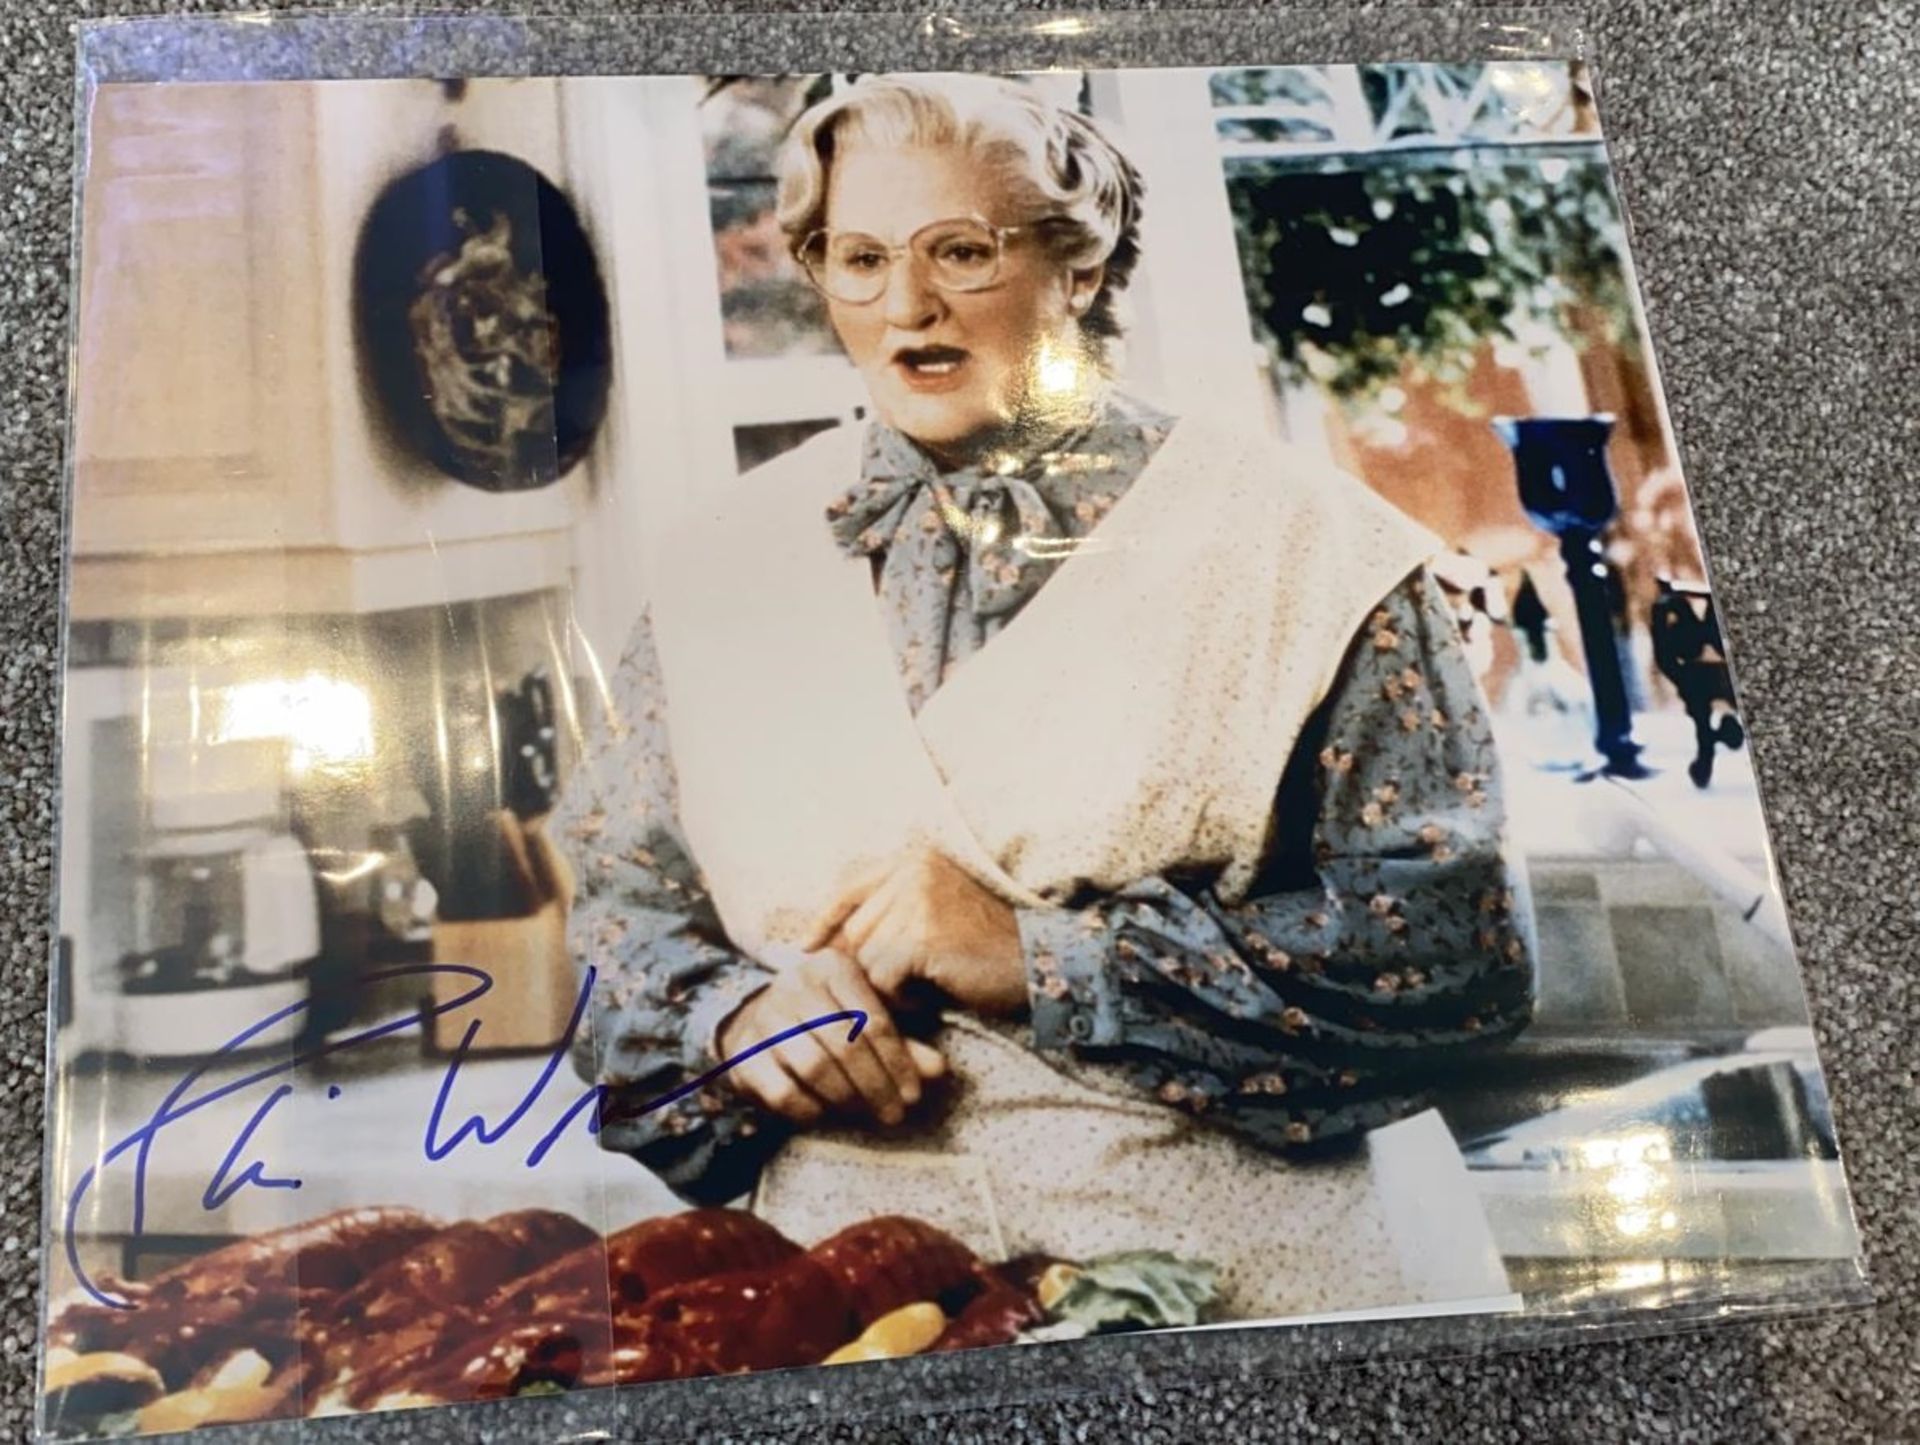 1 x Signed Autograph Picture - ROBIN WILLIAMS MRS DOUBTFIRE - With COA - Size 12 x 8 Inch - NO VAT - Image 3 of 3